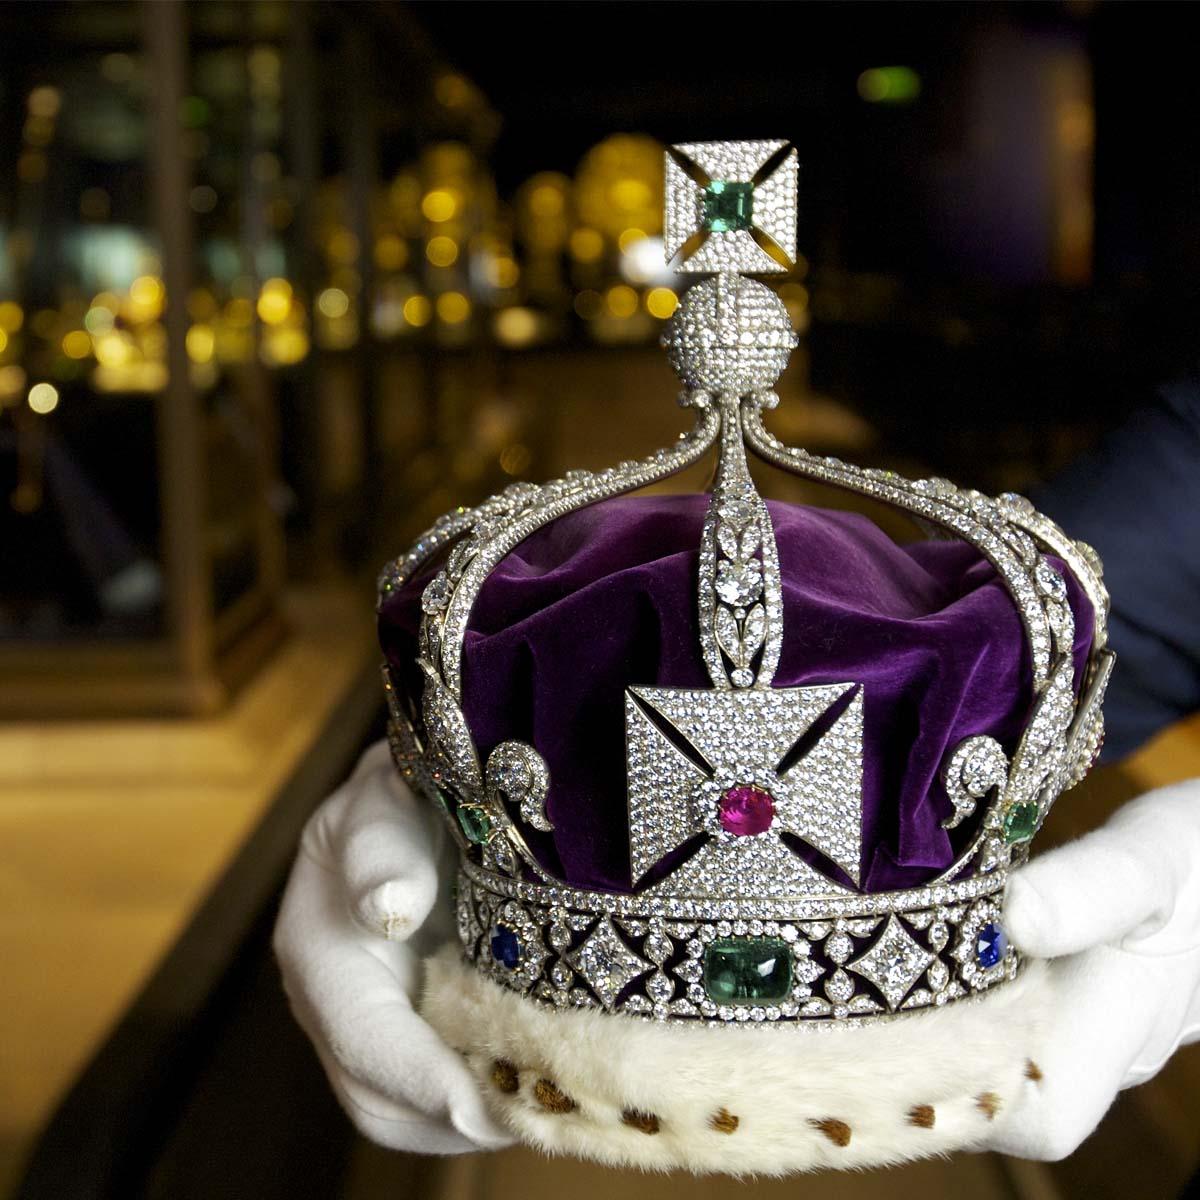 The Crown Jewels of Great Britain and the Commonwealth - Monroe Yorke Diamonds